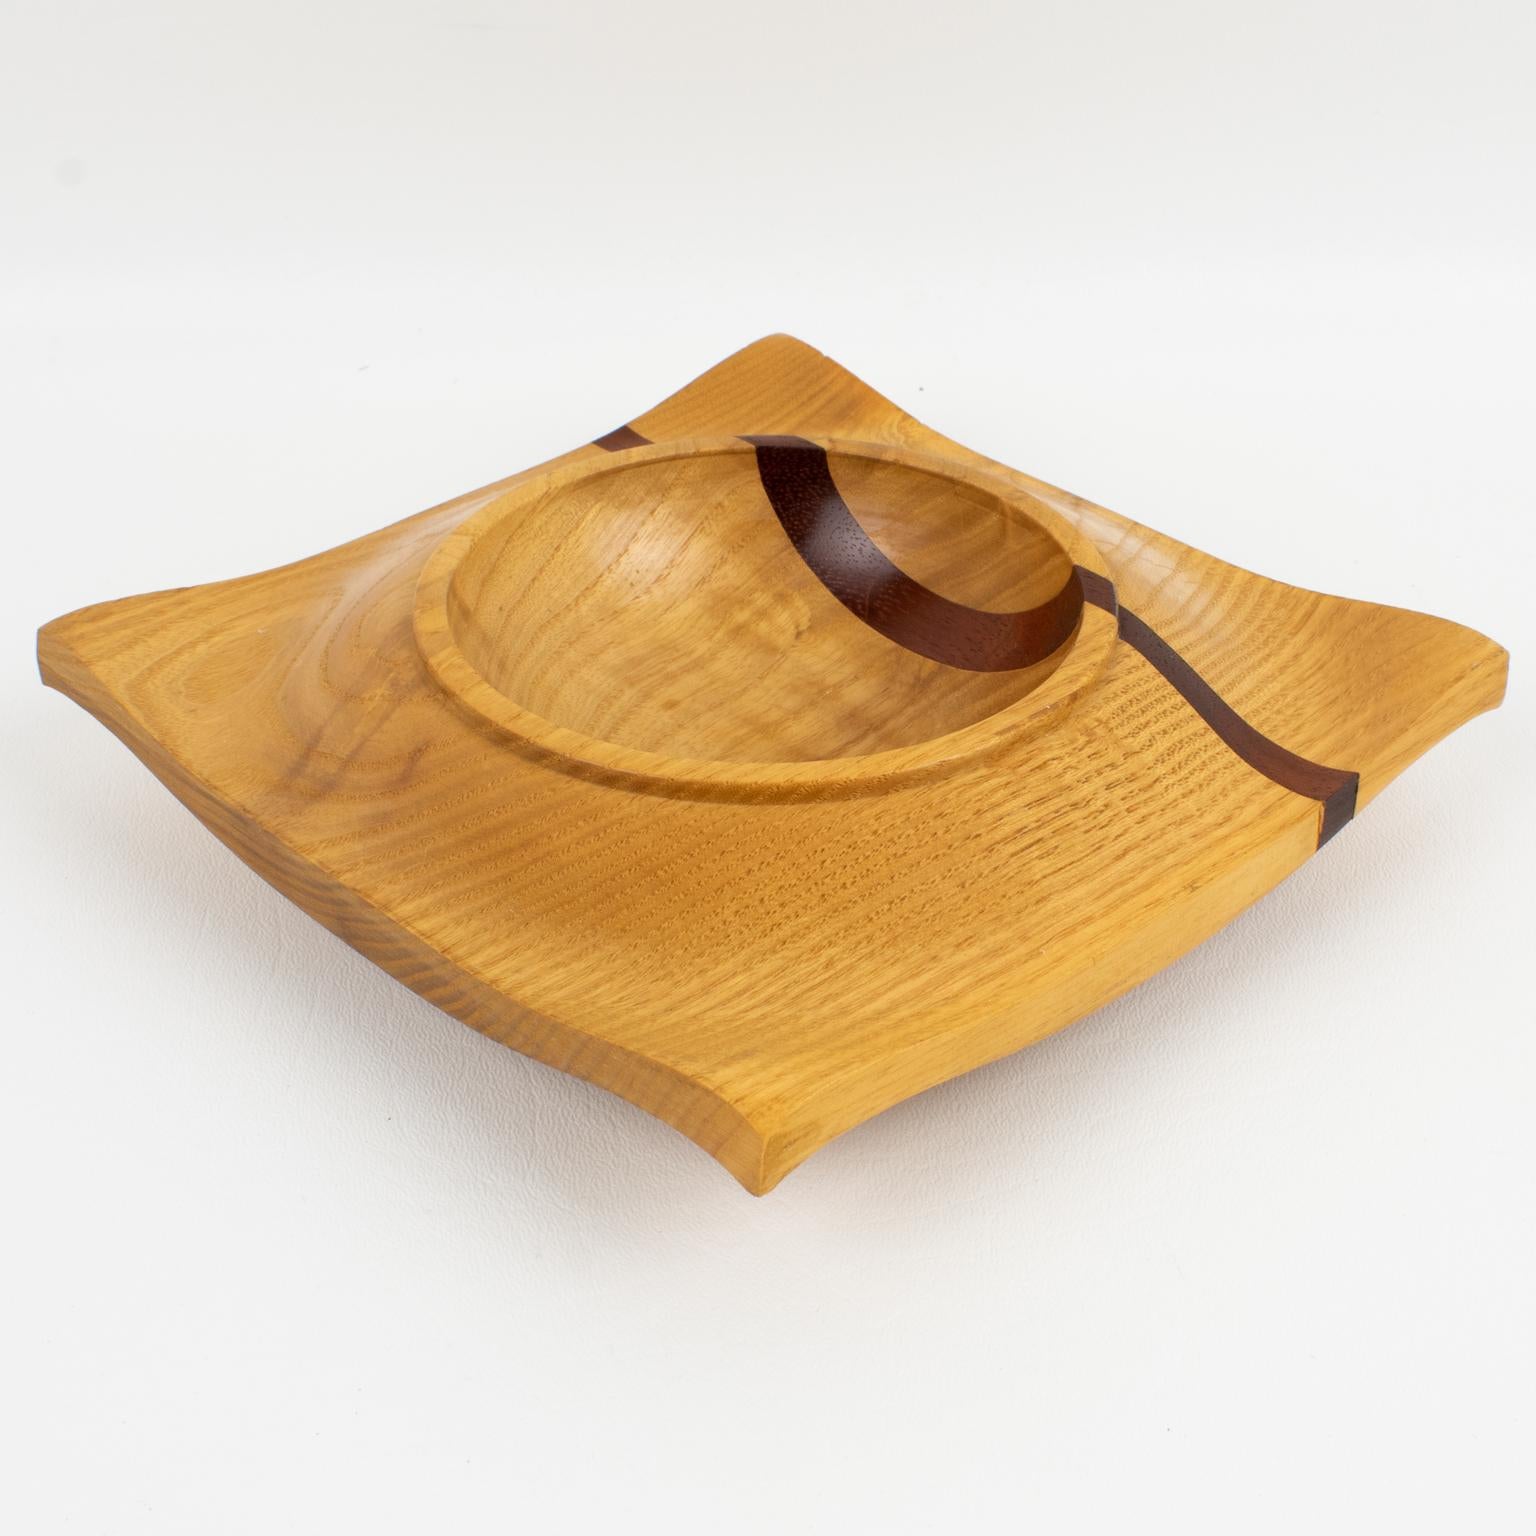 Space Age Danish Carved Wood Bowl Centerpiece Catchall Vide Poche, 1980s For Sale 3